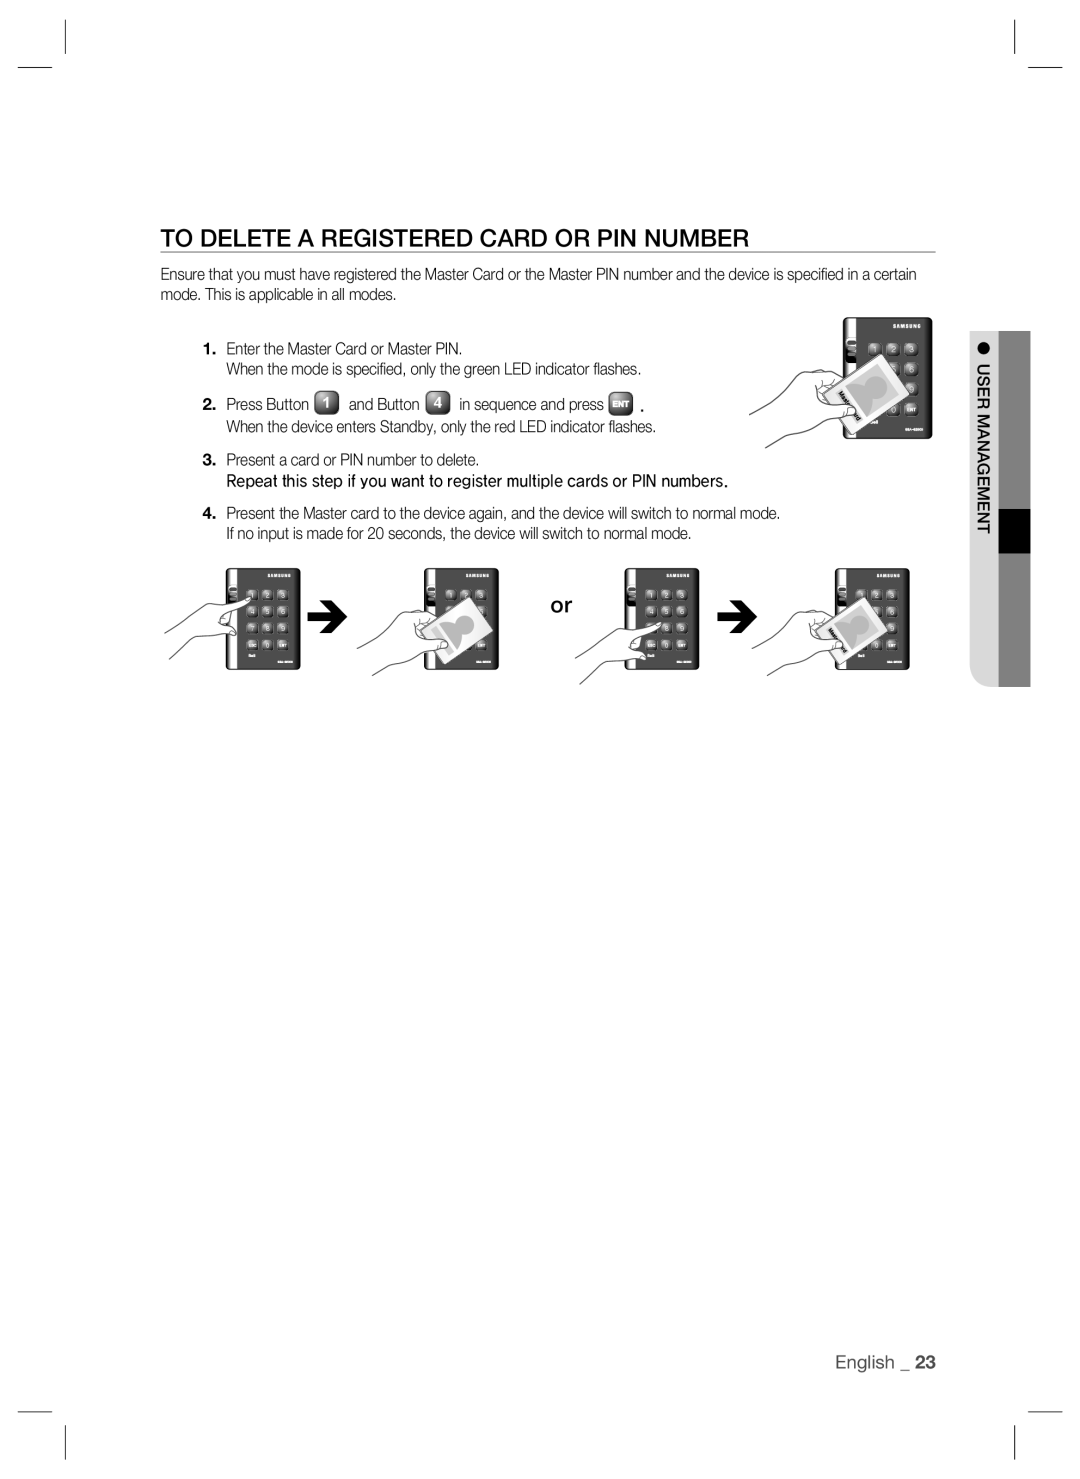 Samsung SSA-S2000W user manual To Delete A Registered Card Or Pin Number, English 